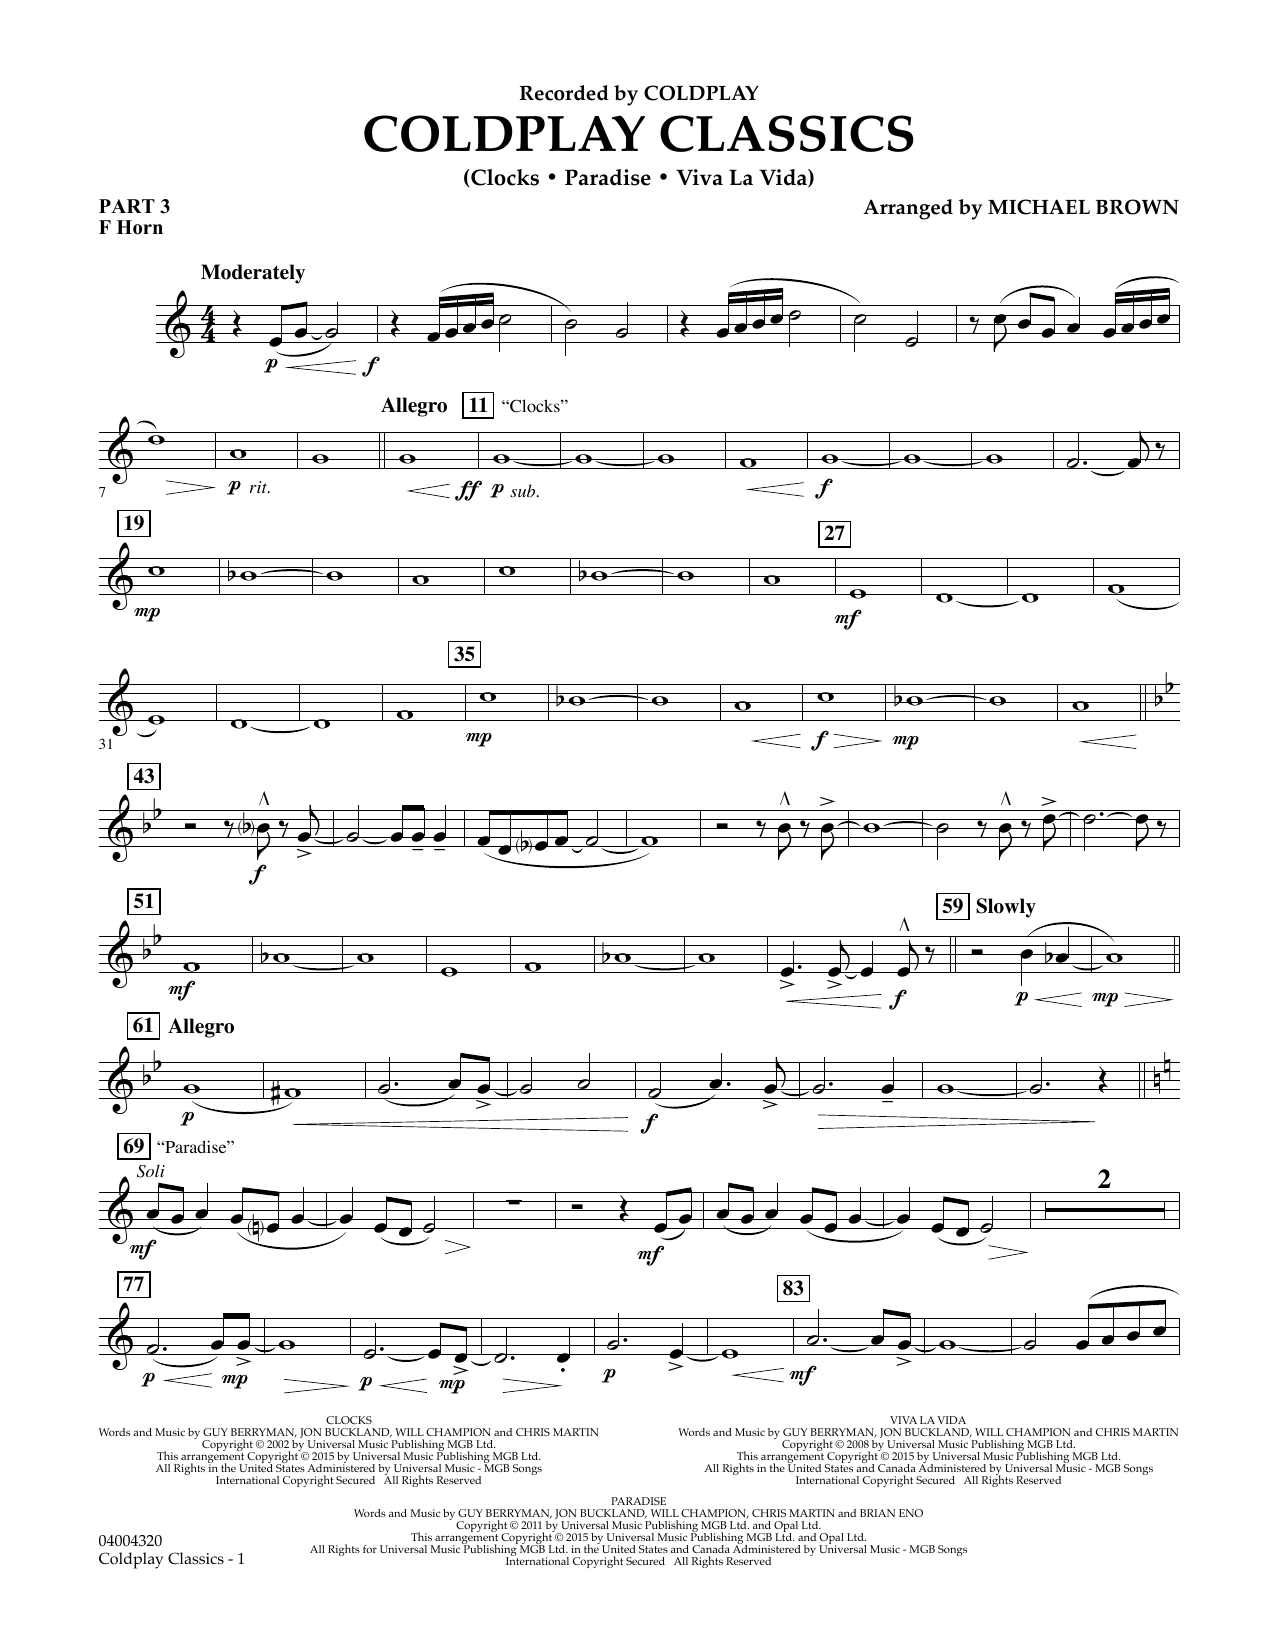 Michael Brown Coldplay Classics - Pt.3 - F Horn sheet music notes and chords. Download Printable PDF.